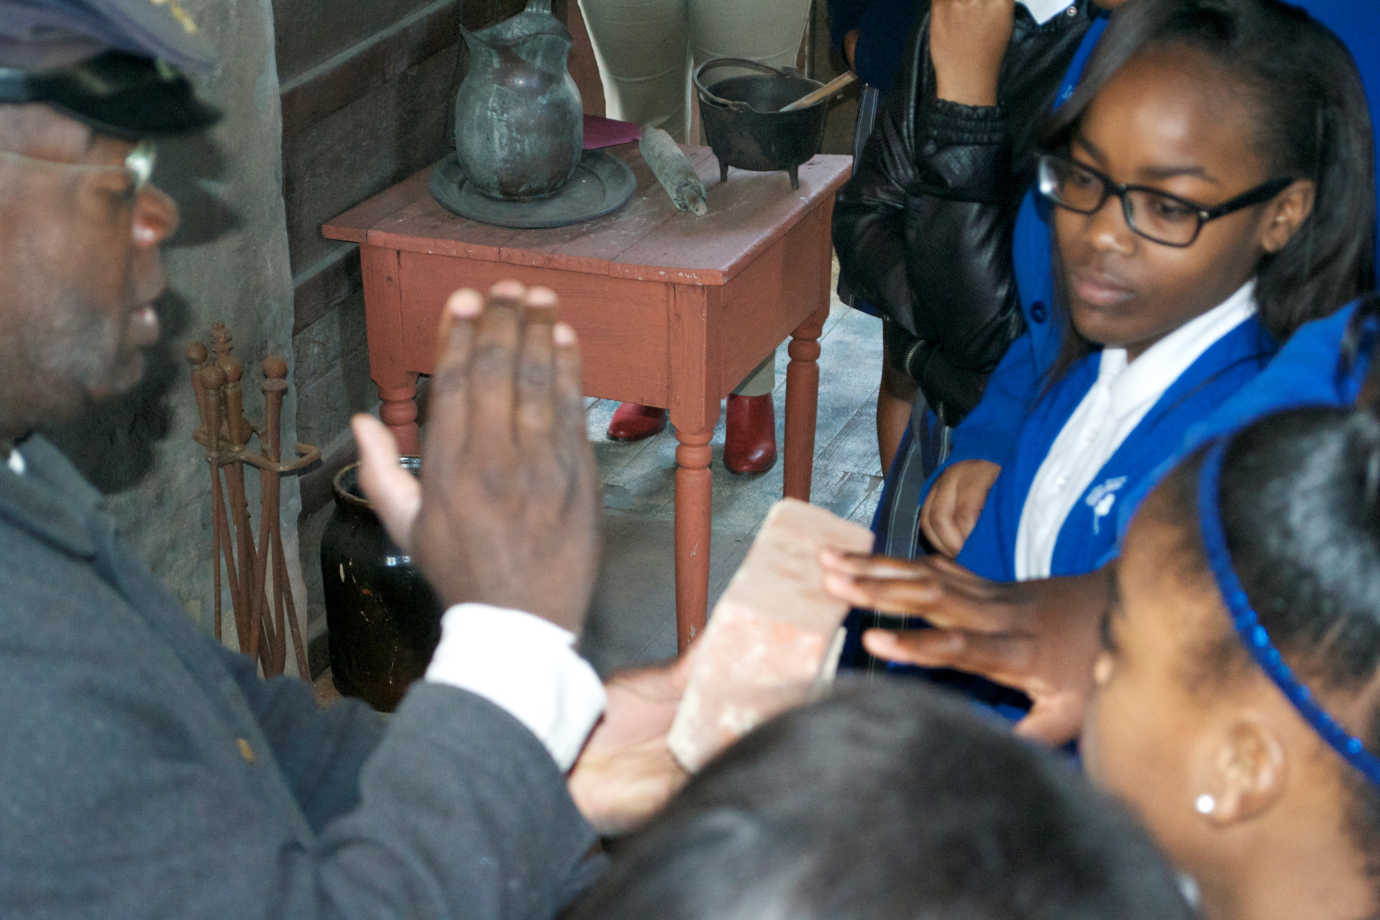 Participants examine historic artifacts in former slave quarters as part of their tour “Behind the Big House,” funded through the Racial Equity Grants program. Photo courtesy of Mississippi Humanities Council.